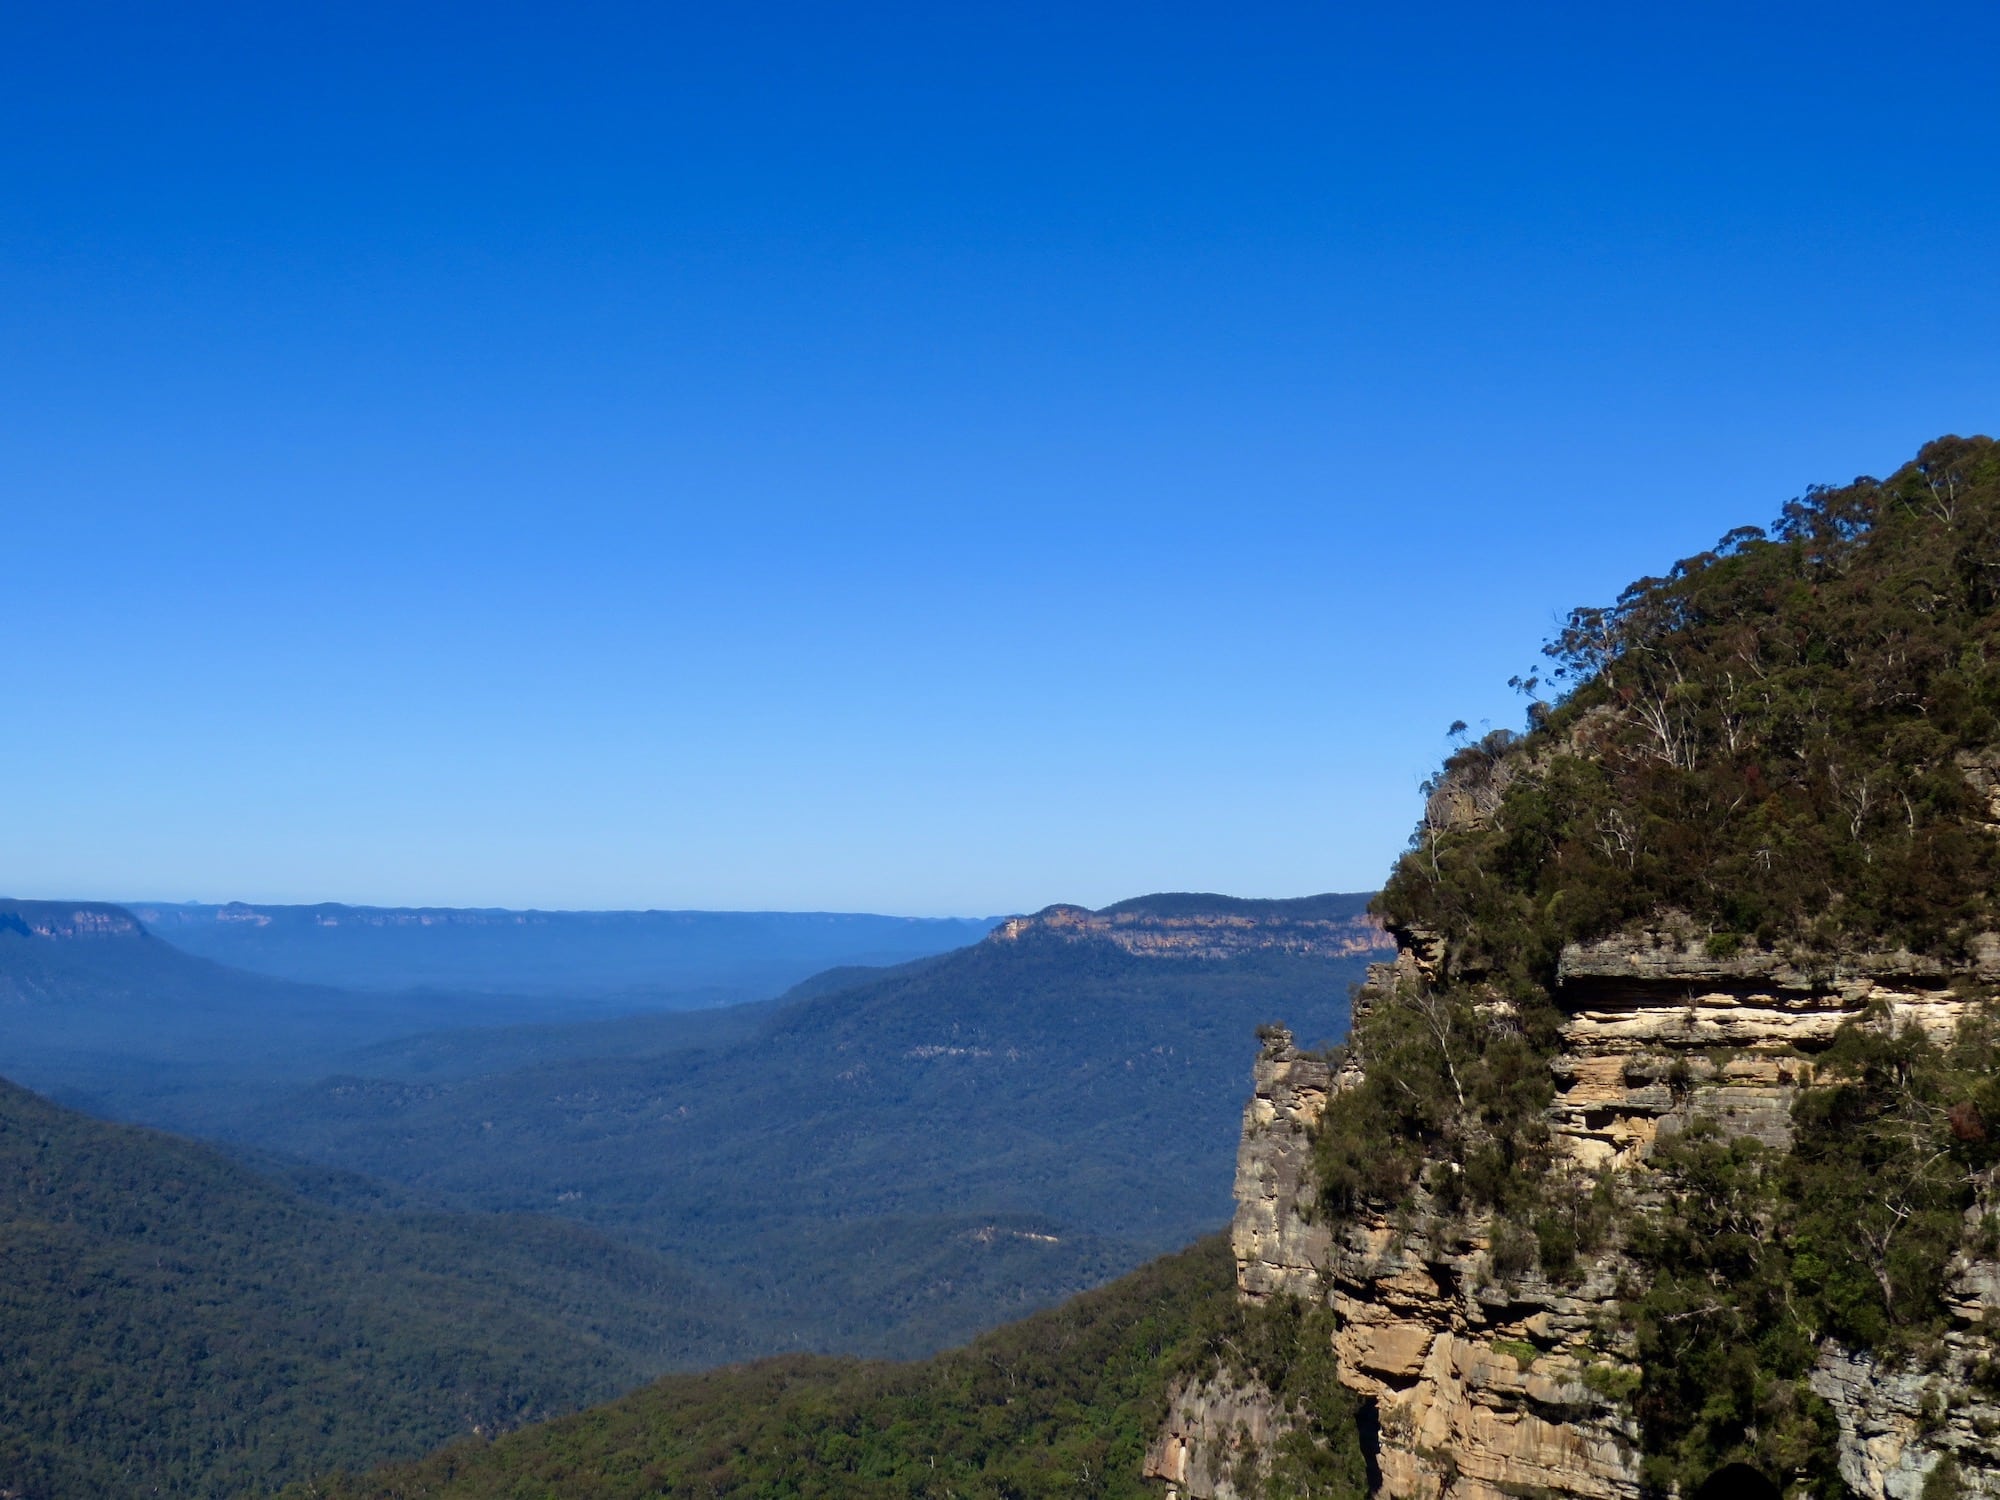 Views over the Blue Mountains